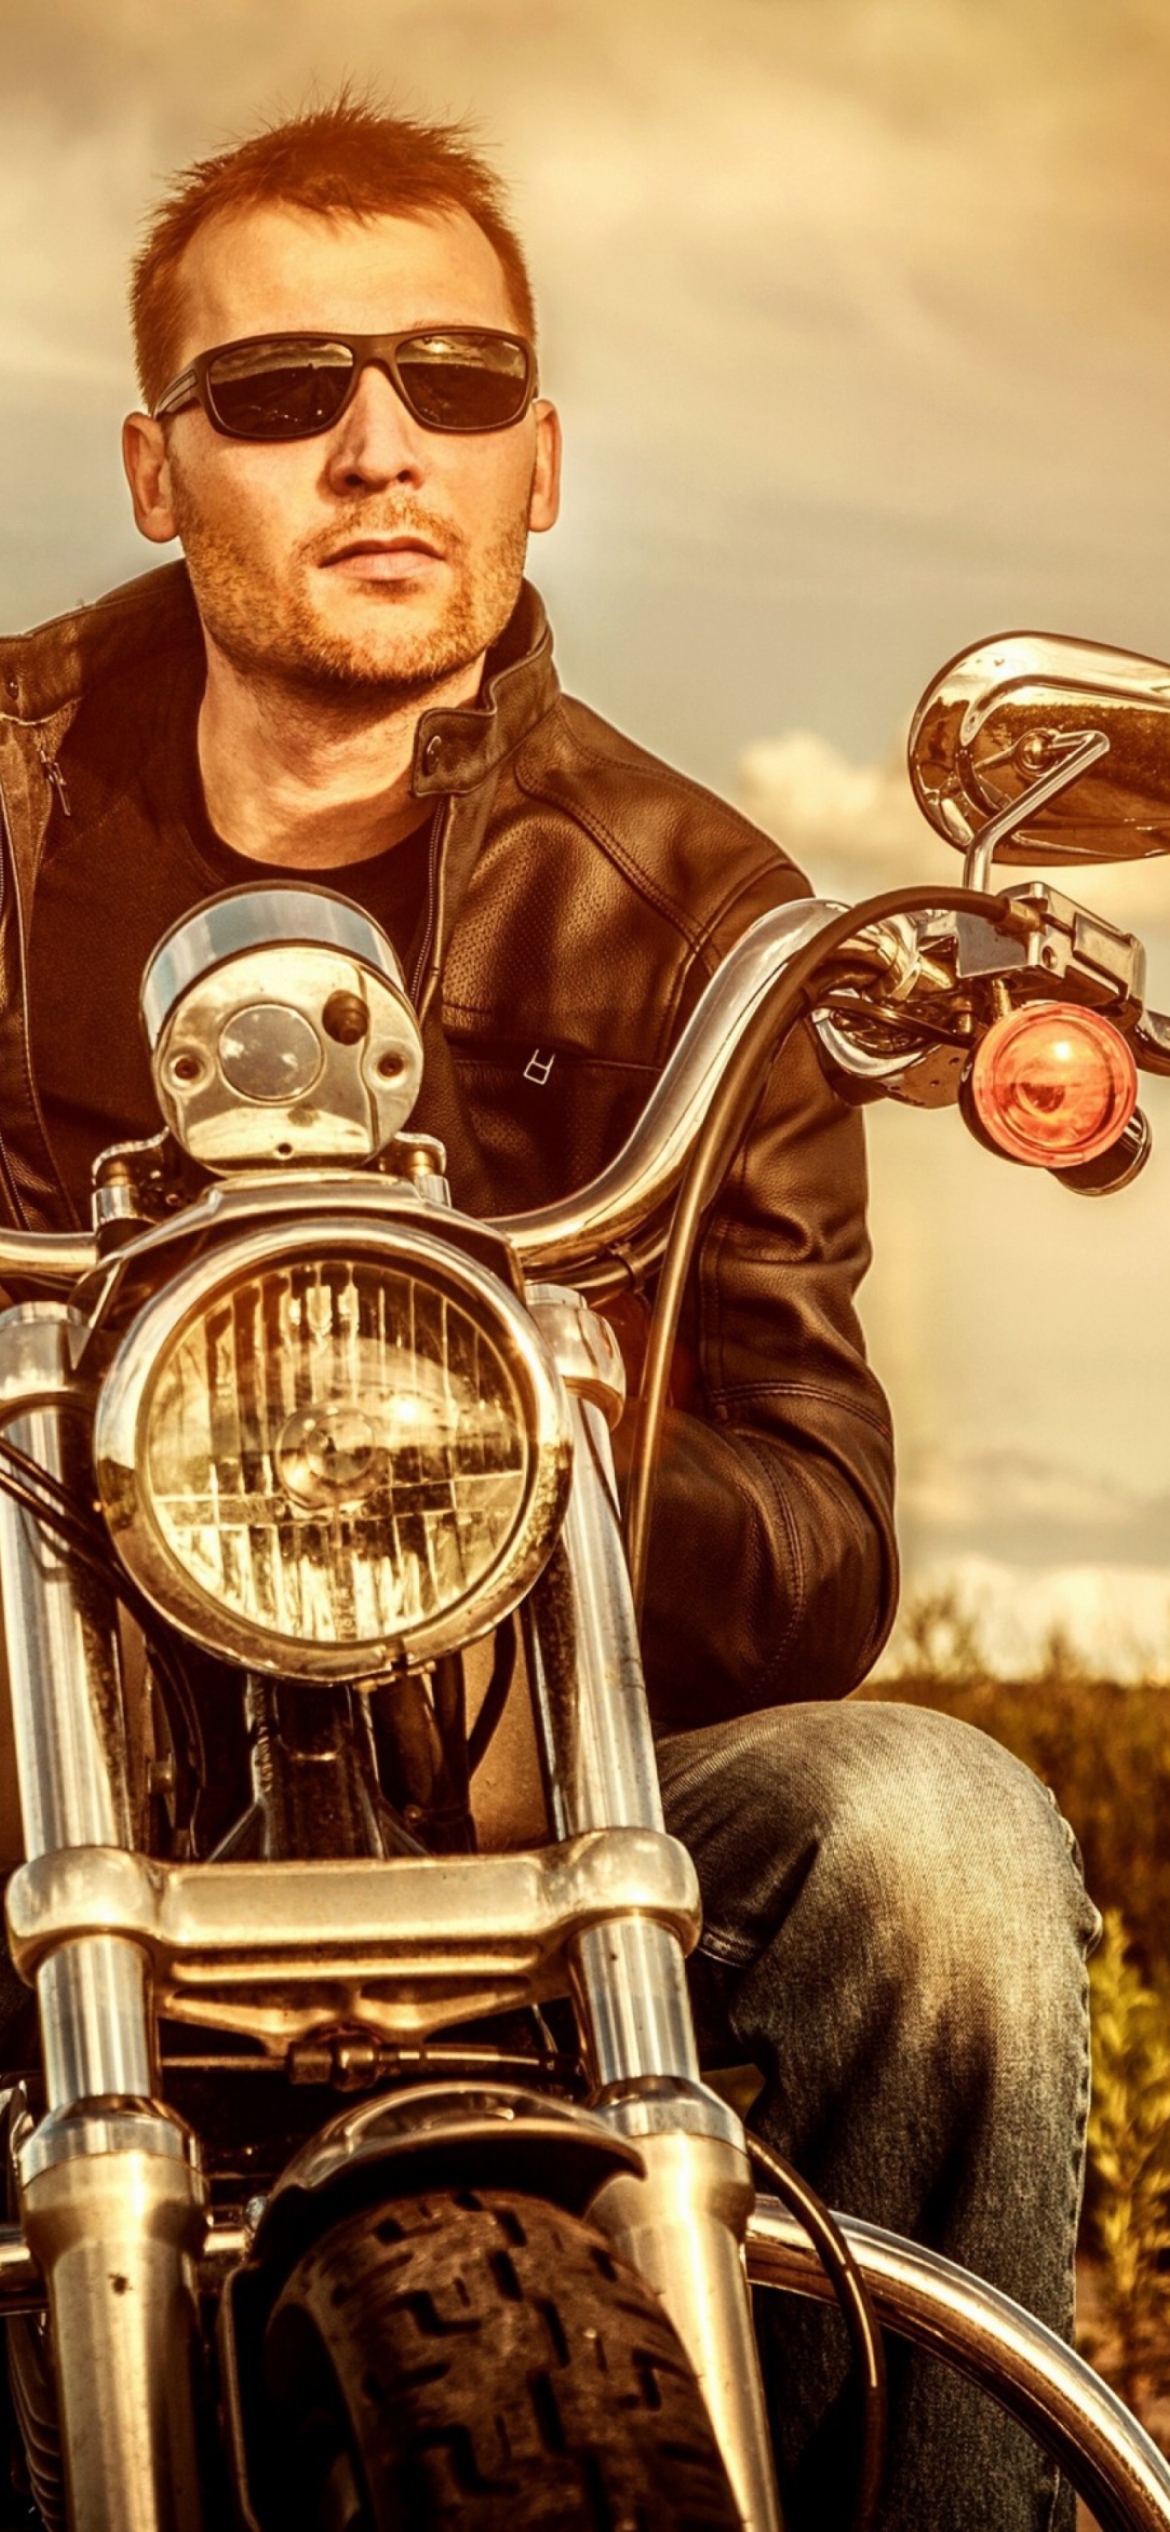 Motorcycle Driver wallpaper 1170x2532